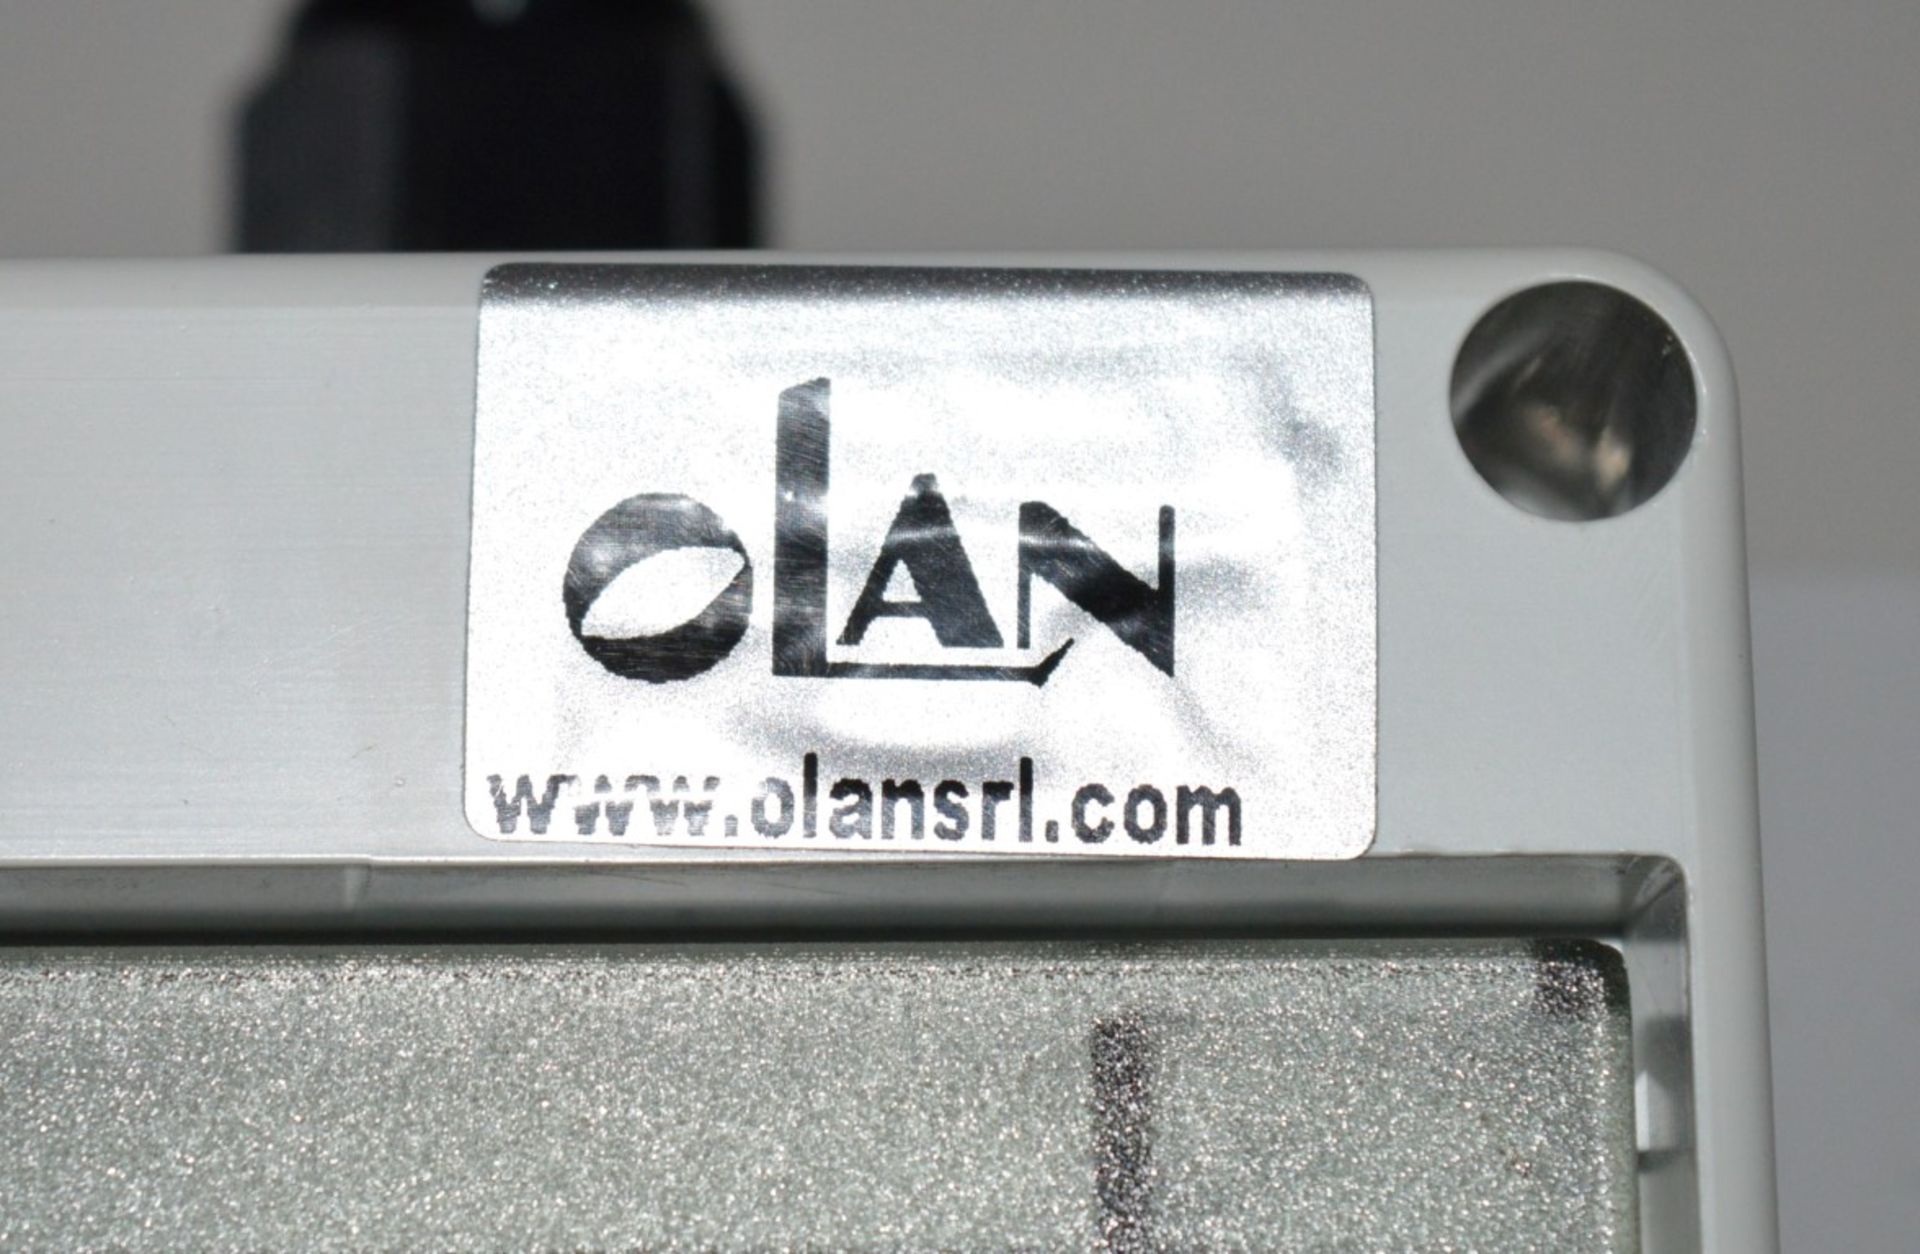 1 x Pre Assembled Olan Fuse Box With Chint Switches and Cable - Metal Construction - Approx Size - Image 12 of 18